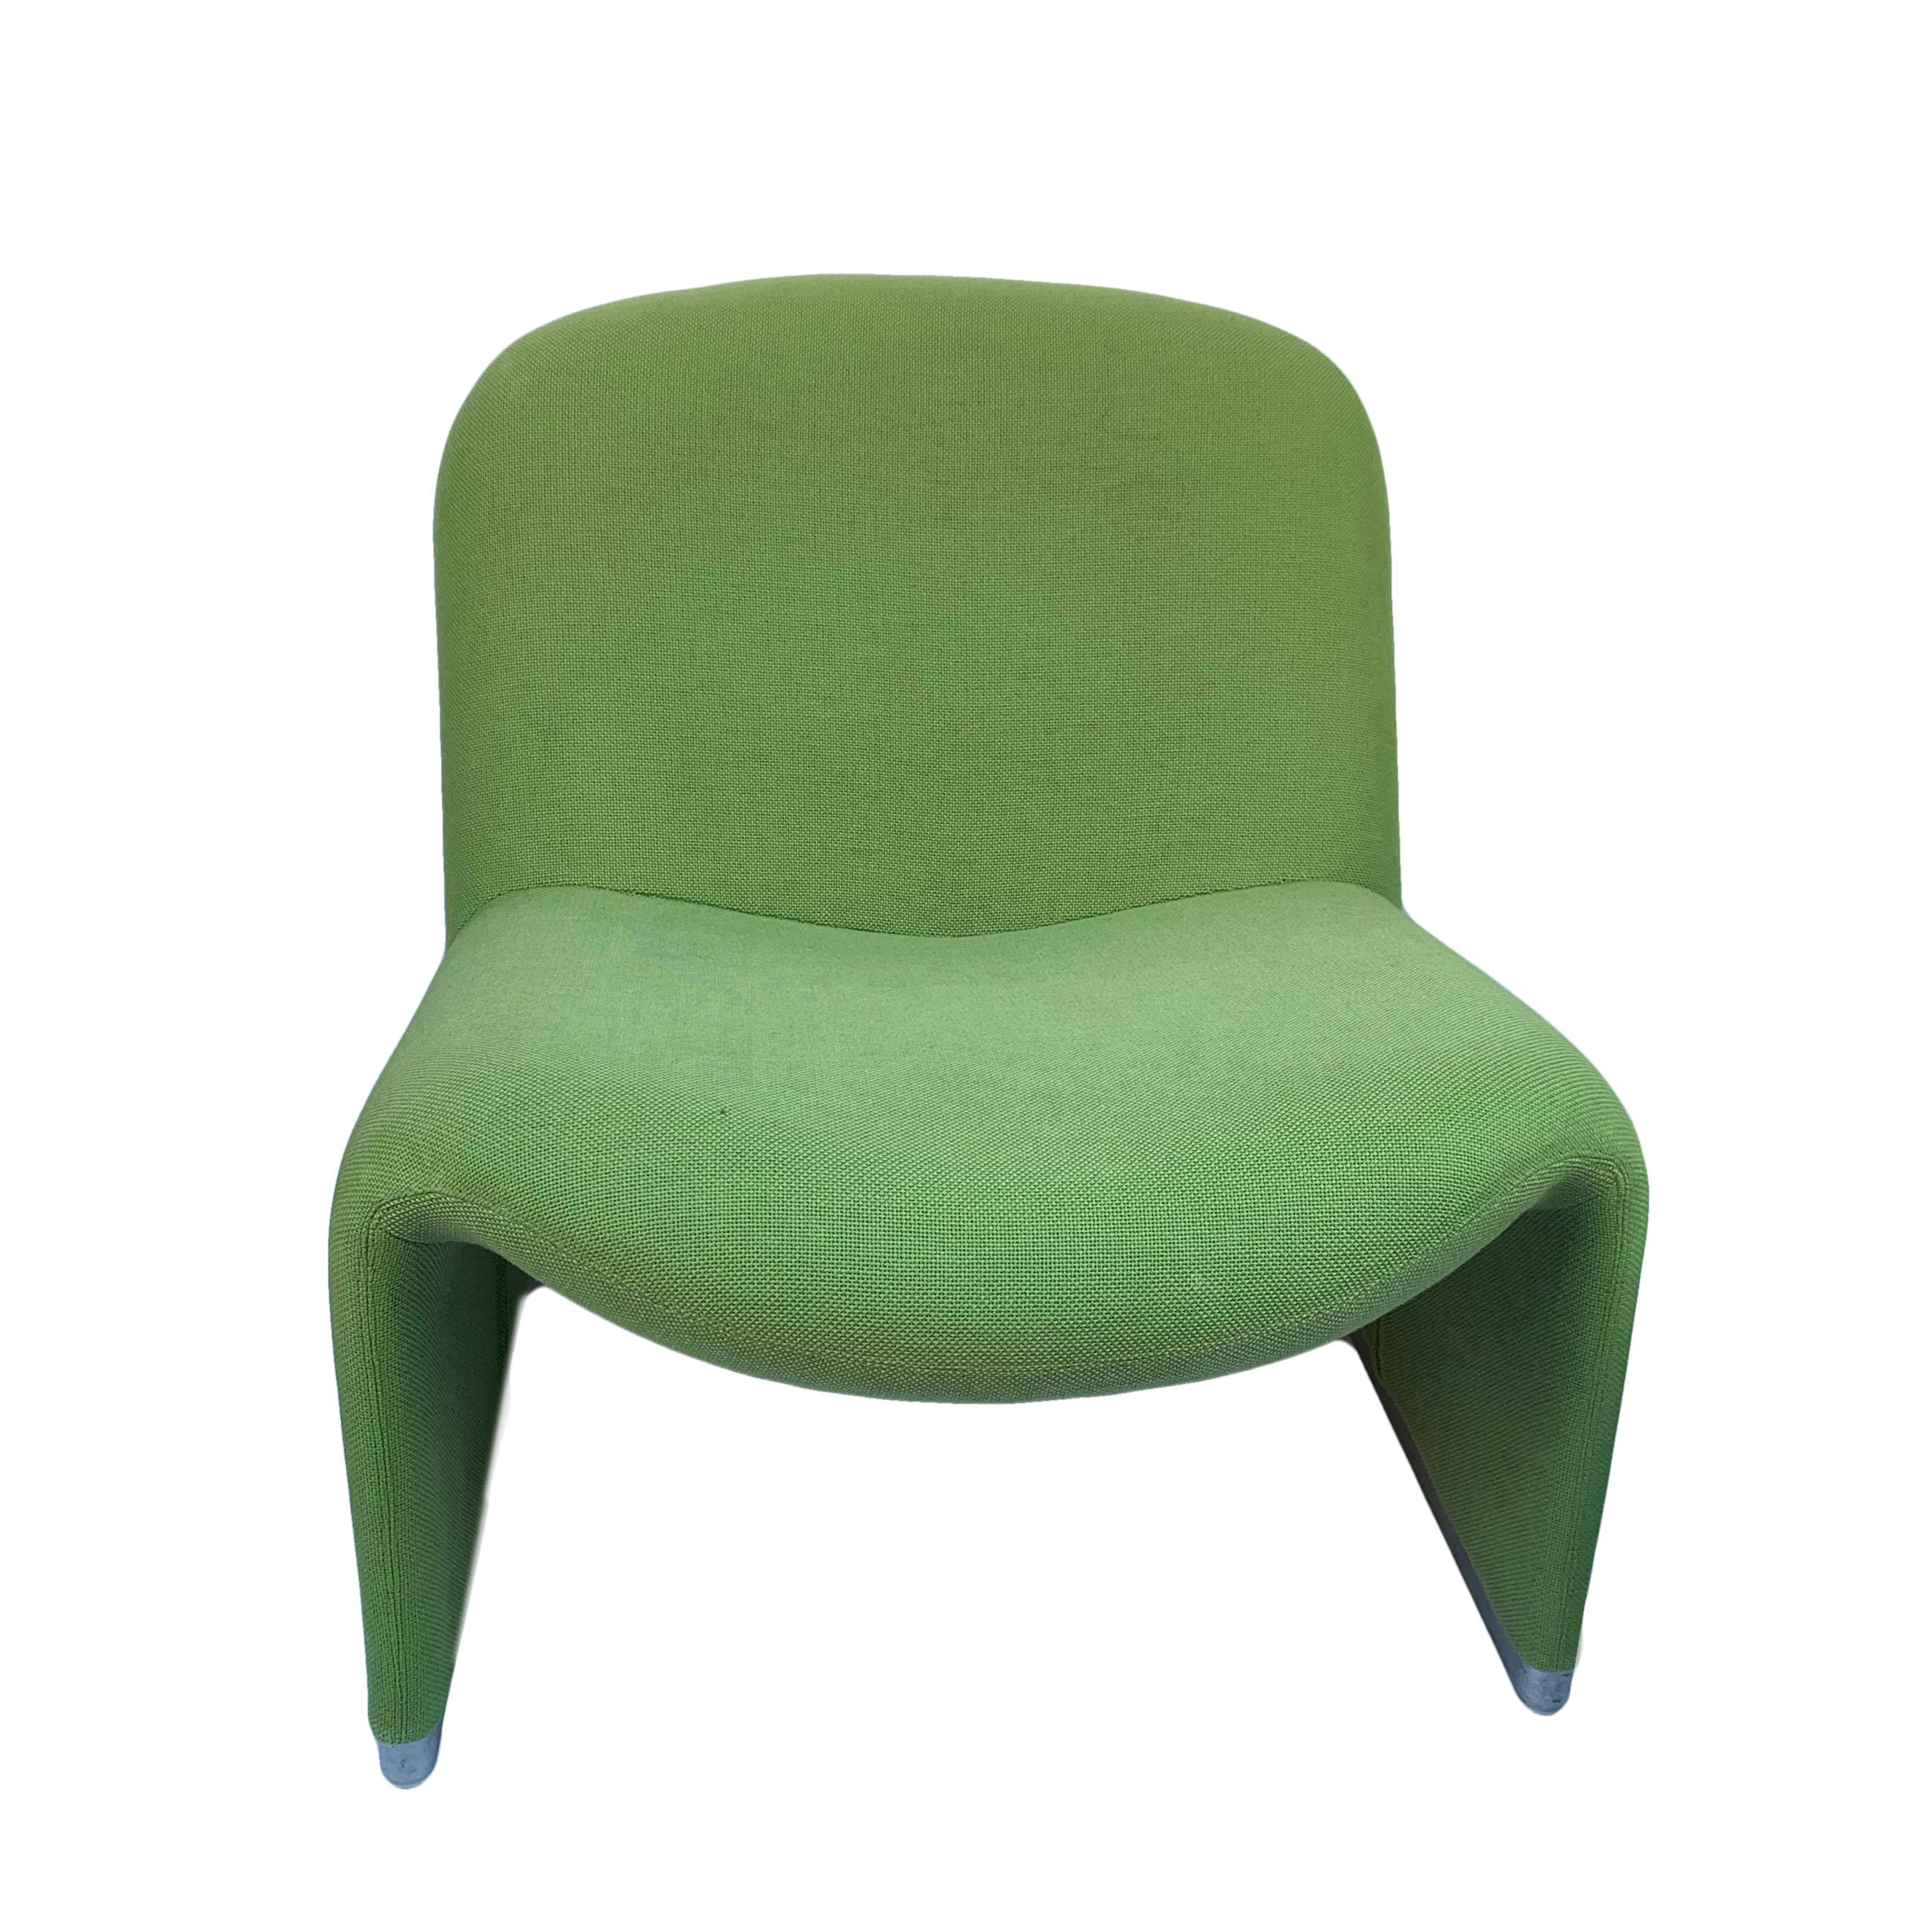 Set of two green armchairs, model Alky by Giancarlo Piretti. Produced by Castelli in Italy in the 1970s
Very comfortable. Original green fabric. Made with foam. Aluminium base. Good condition.
Marked on the bottom.
 